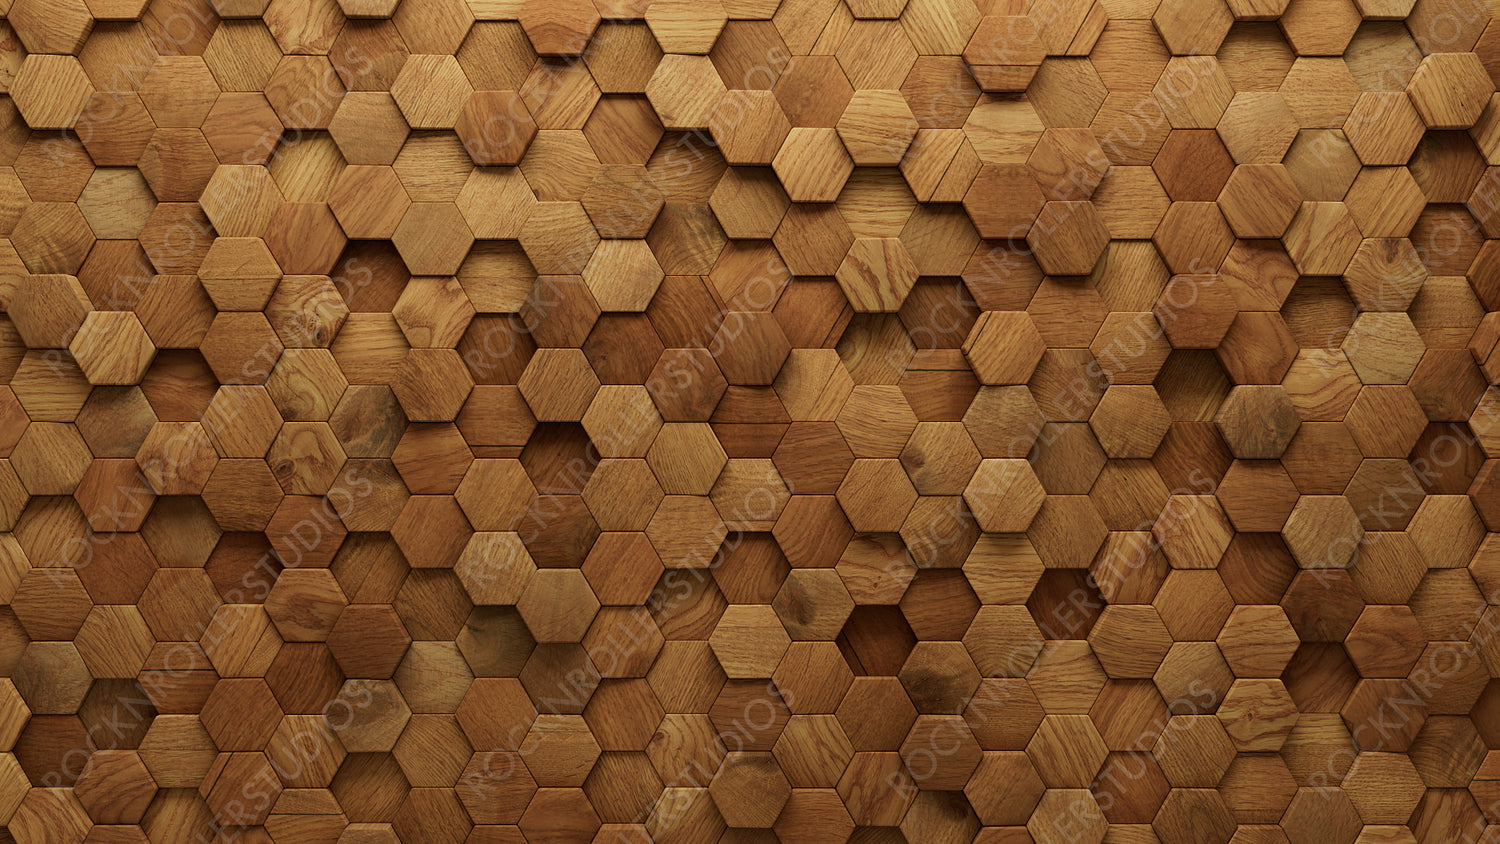 3D, Soft sheen Wall background with tiles. Hexagonal, tile Wallpaper with Wood, Timber blocks. 3D Render